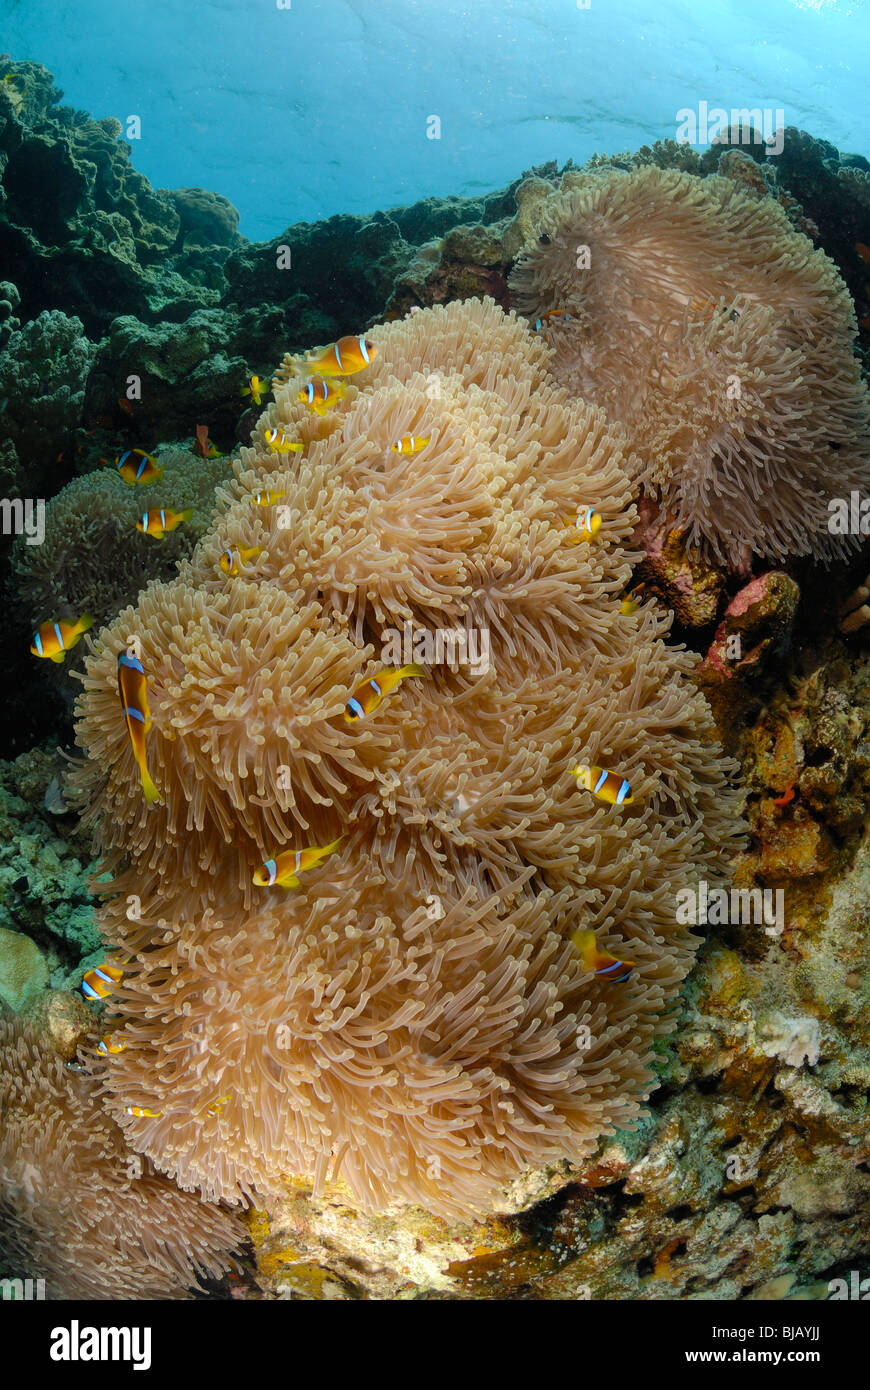 Anemones with twobands anemonefishes off Safaga, Egypt, Red Sea. Stock Photo